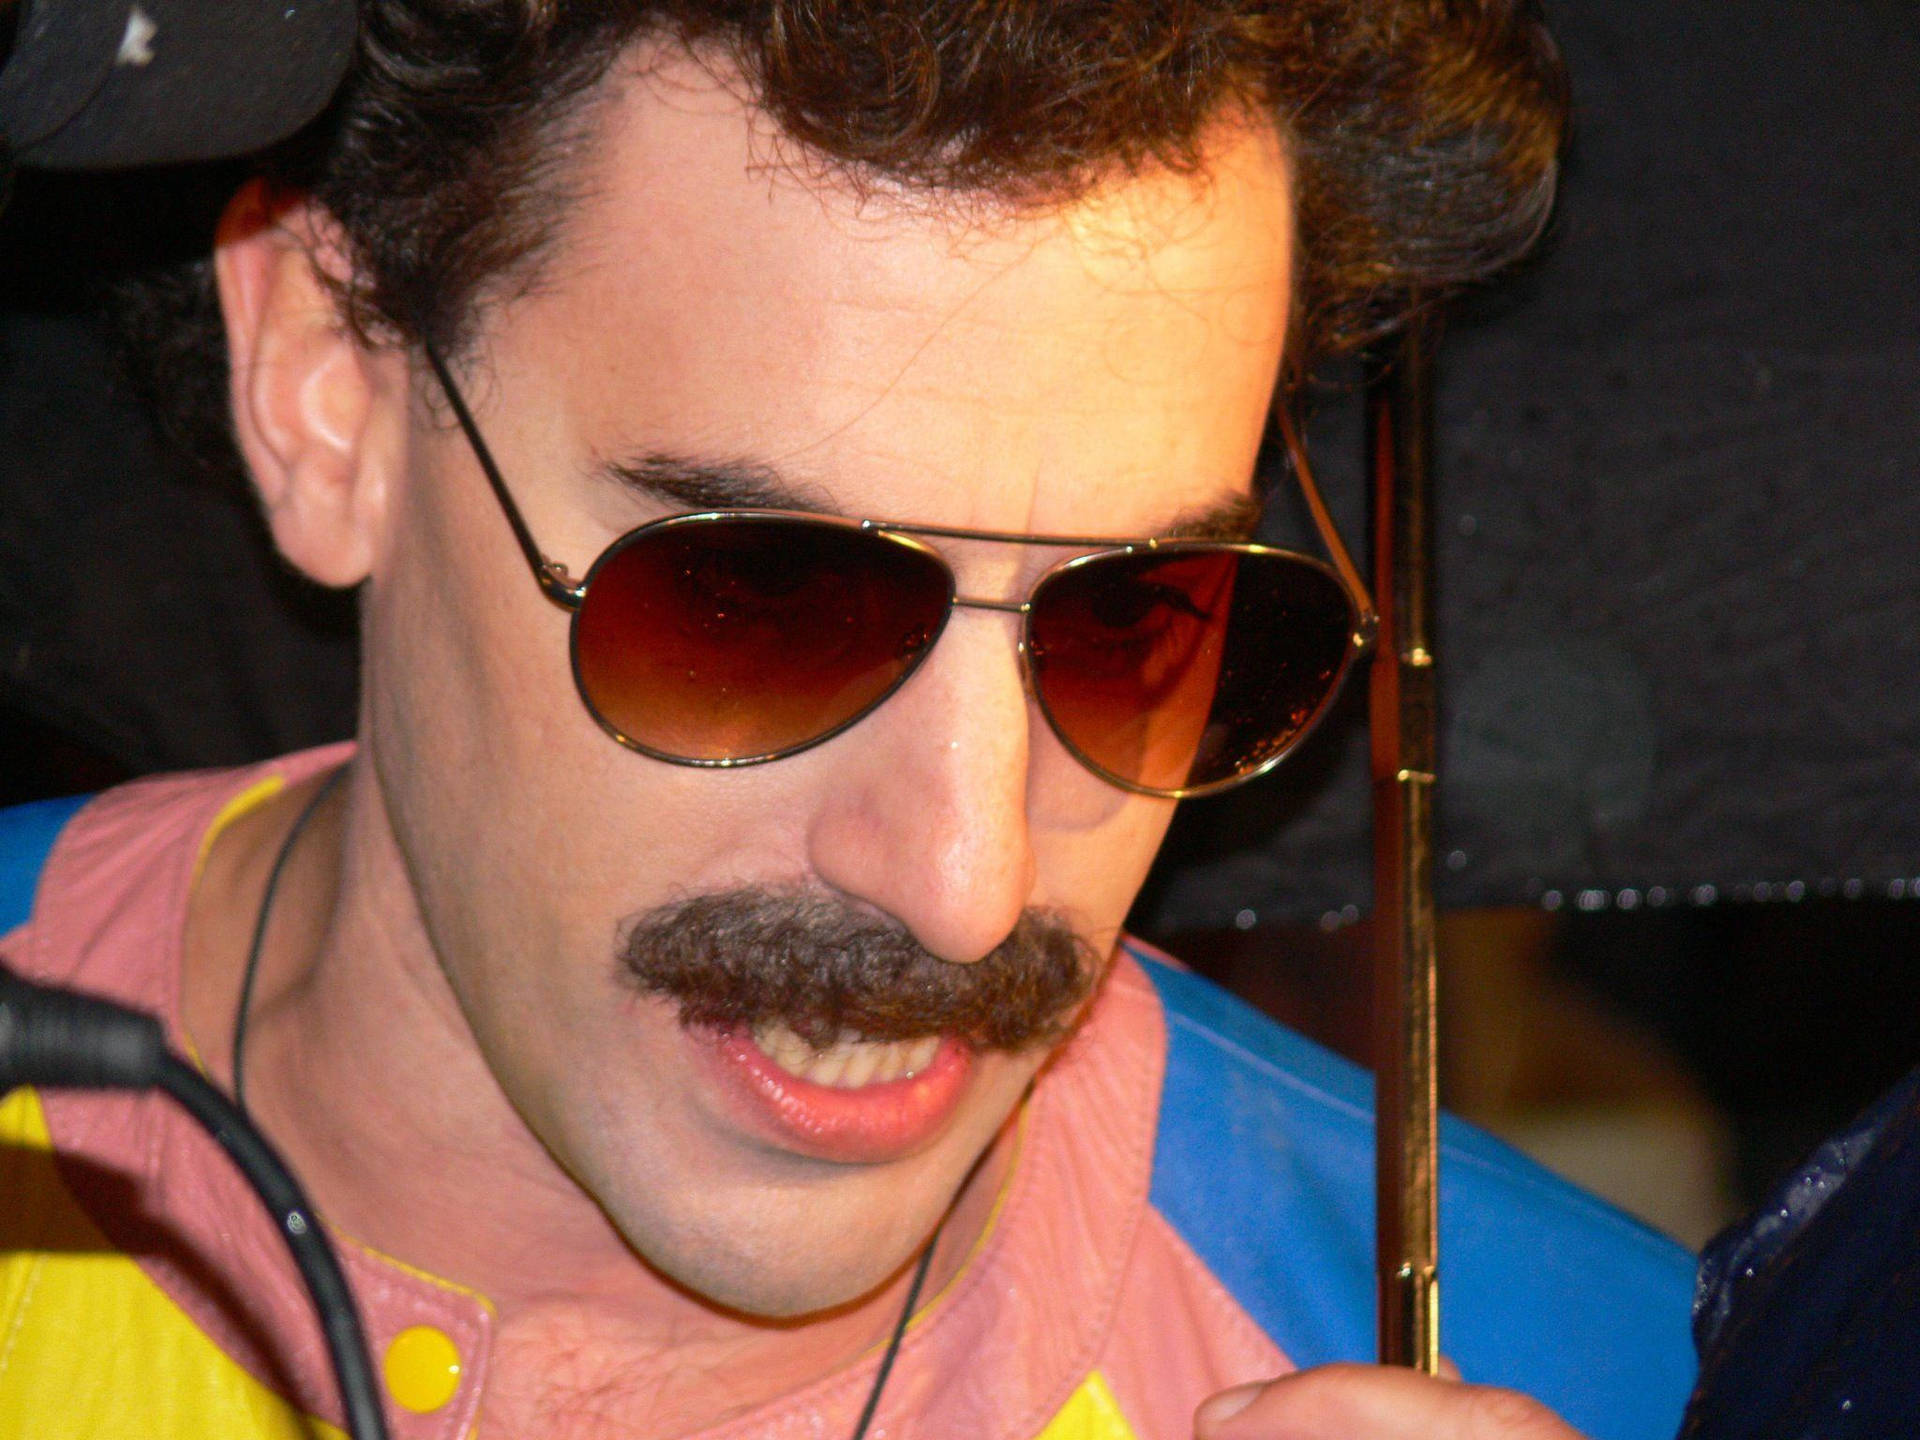 Sachabaron Cohen Borat Sagdiyev Would Not Be Appropriate In The Context Of Computer Or Mobile Wallpaper, As It Is A Sentence Referring To A Person's Name. However, If You Would Like A Translation Related To Computer Or Mobile Wallpaper, I Can Provide One For You. Sfondo